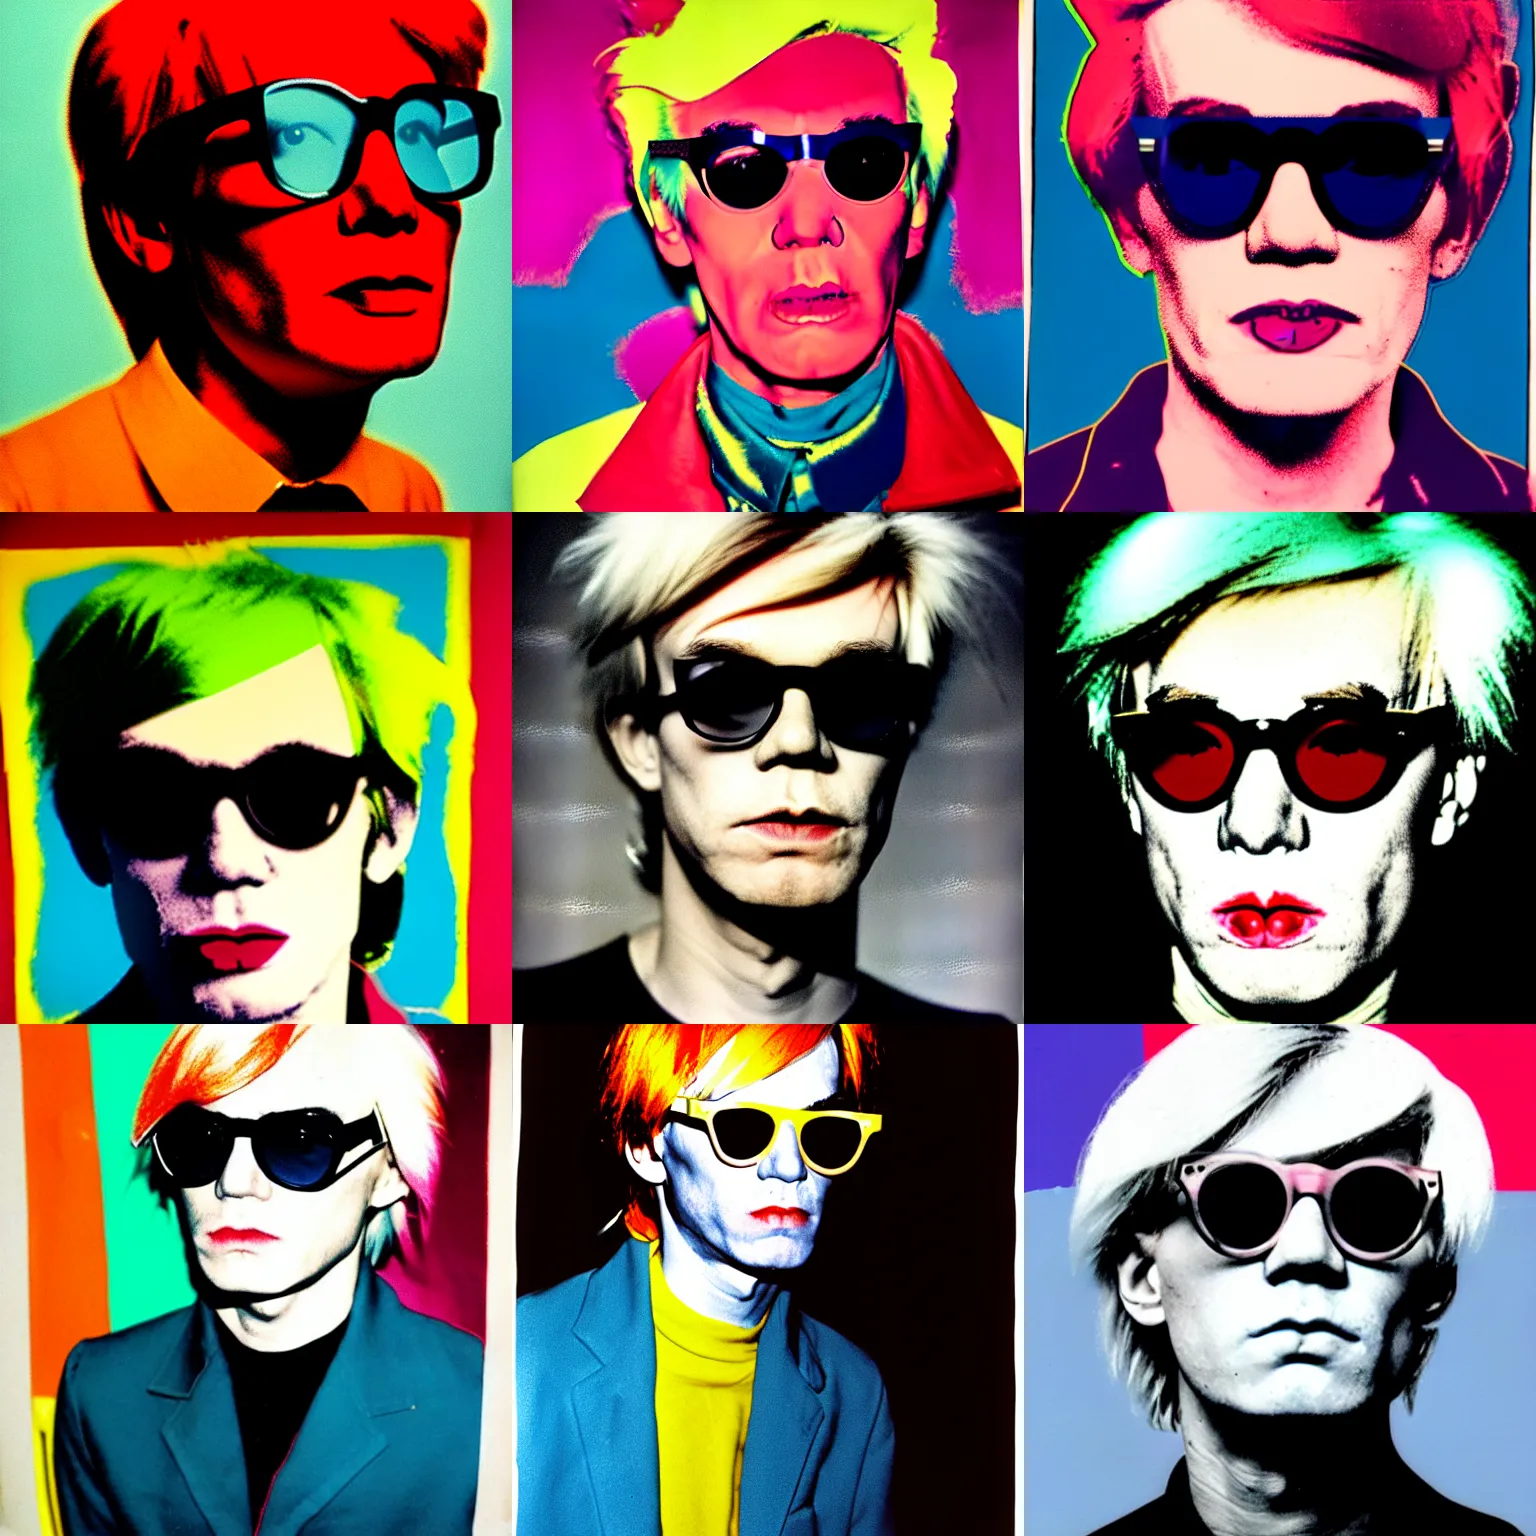 Prompt: colour portrait of absolutely angry andy warhol aged 20 looking sternly straight into the camera and wearing designer sun glasses, in the style of andy warhol